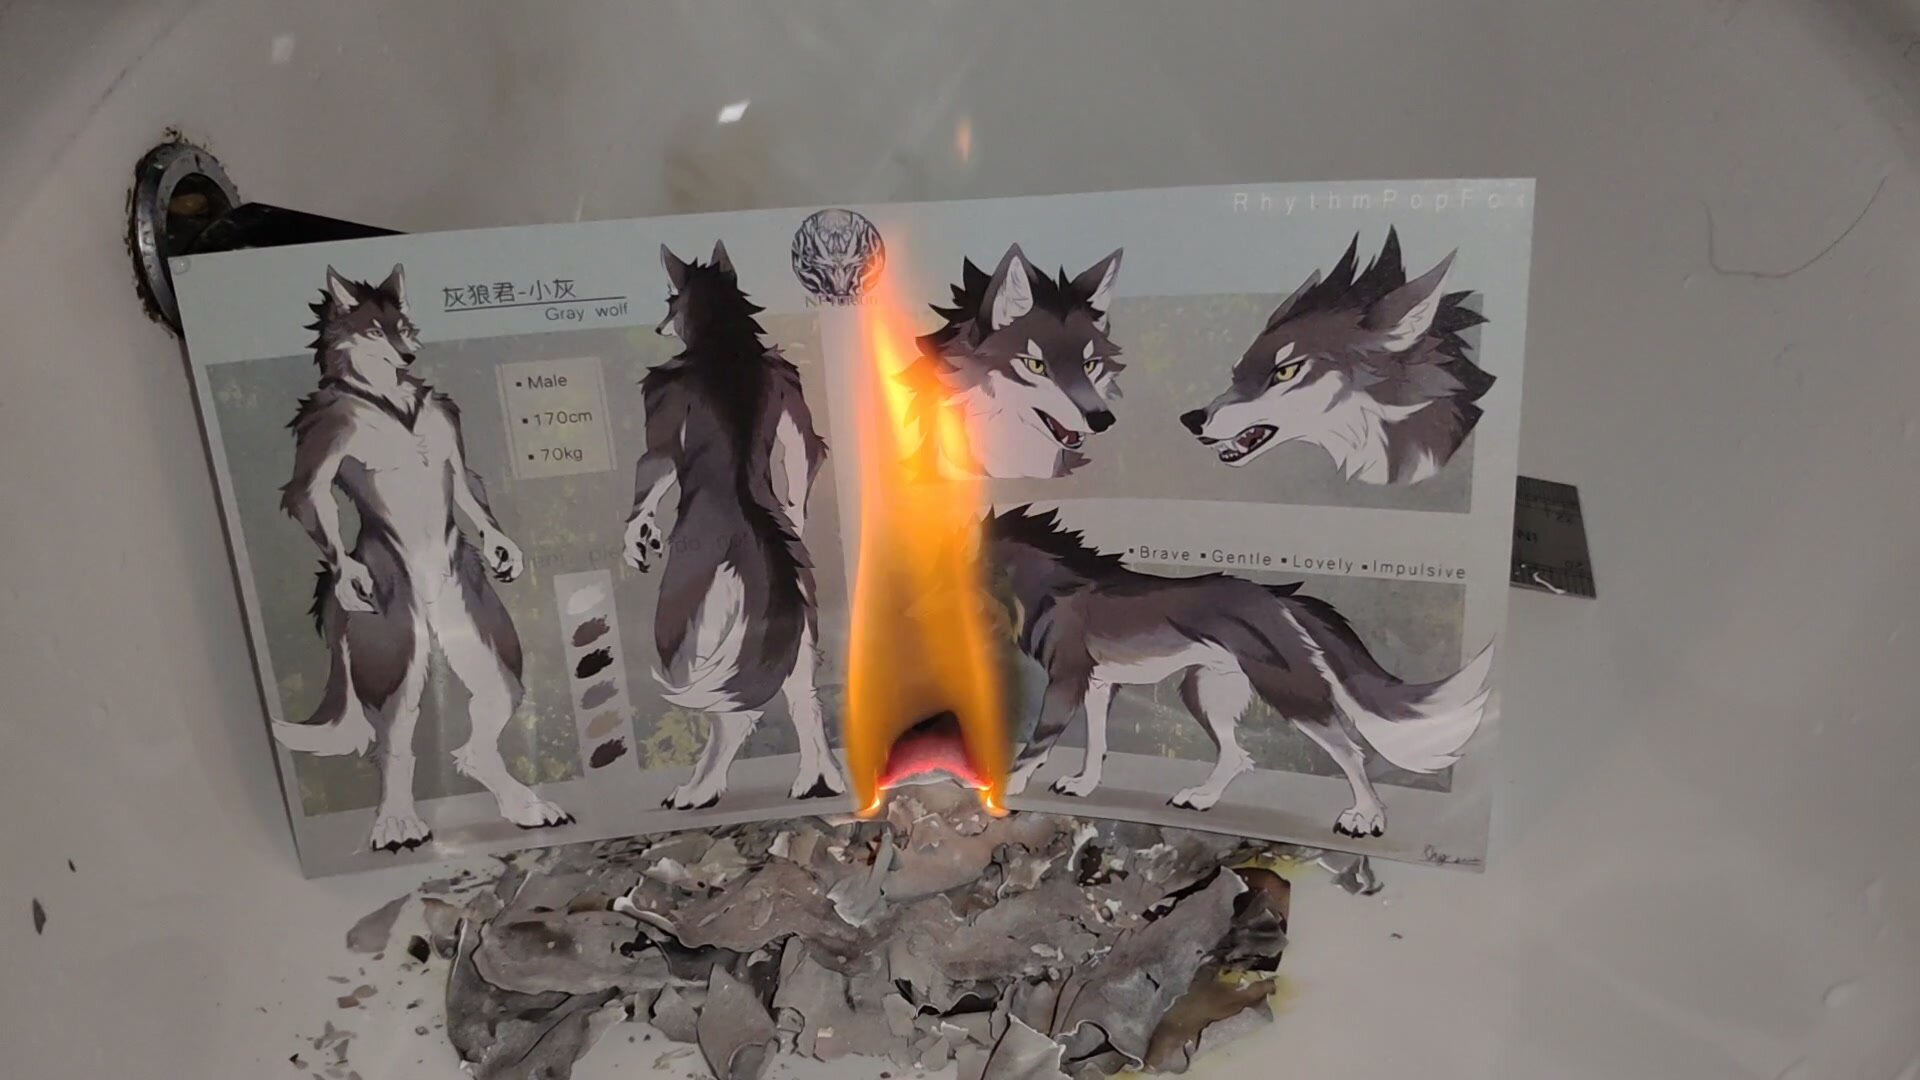 Enjoy the process of incinerating the Furry picture - video 11